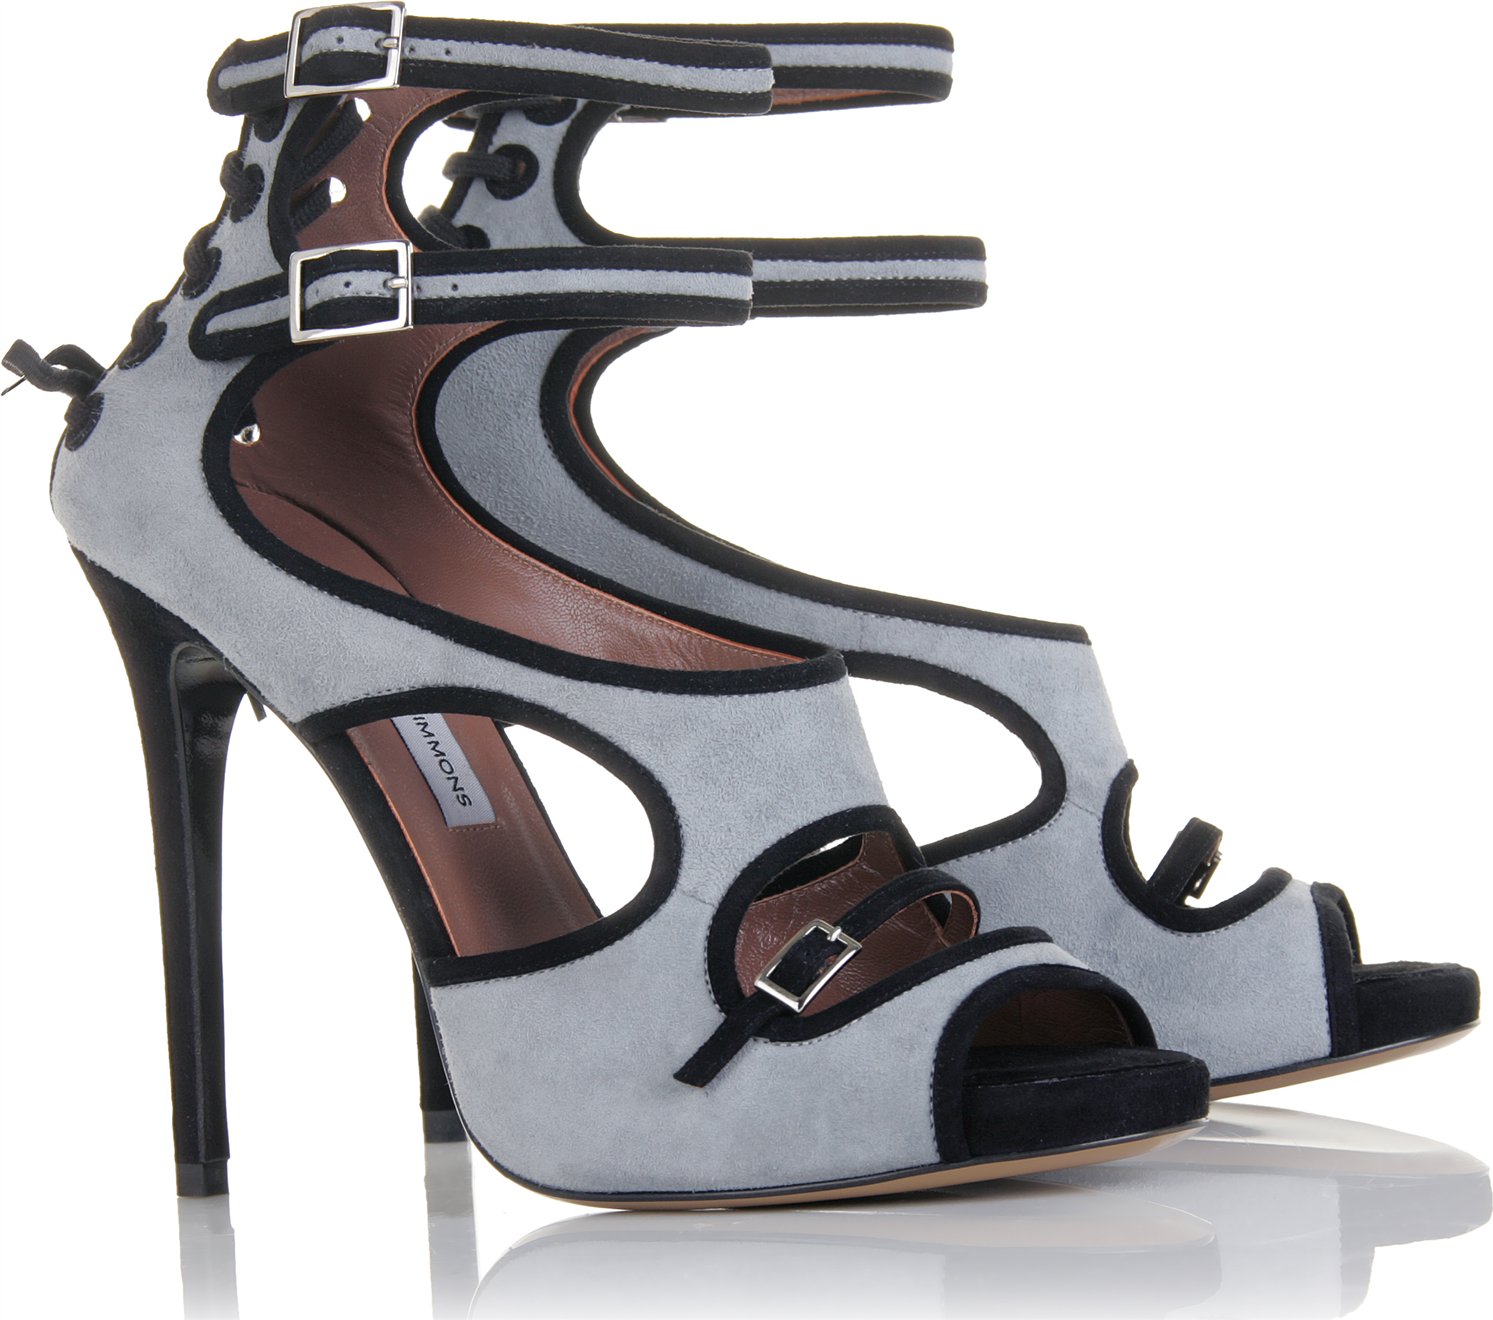 Tabitha Simmons Bailee Suede Sandals in Gray (ice) Lyst